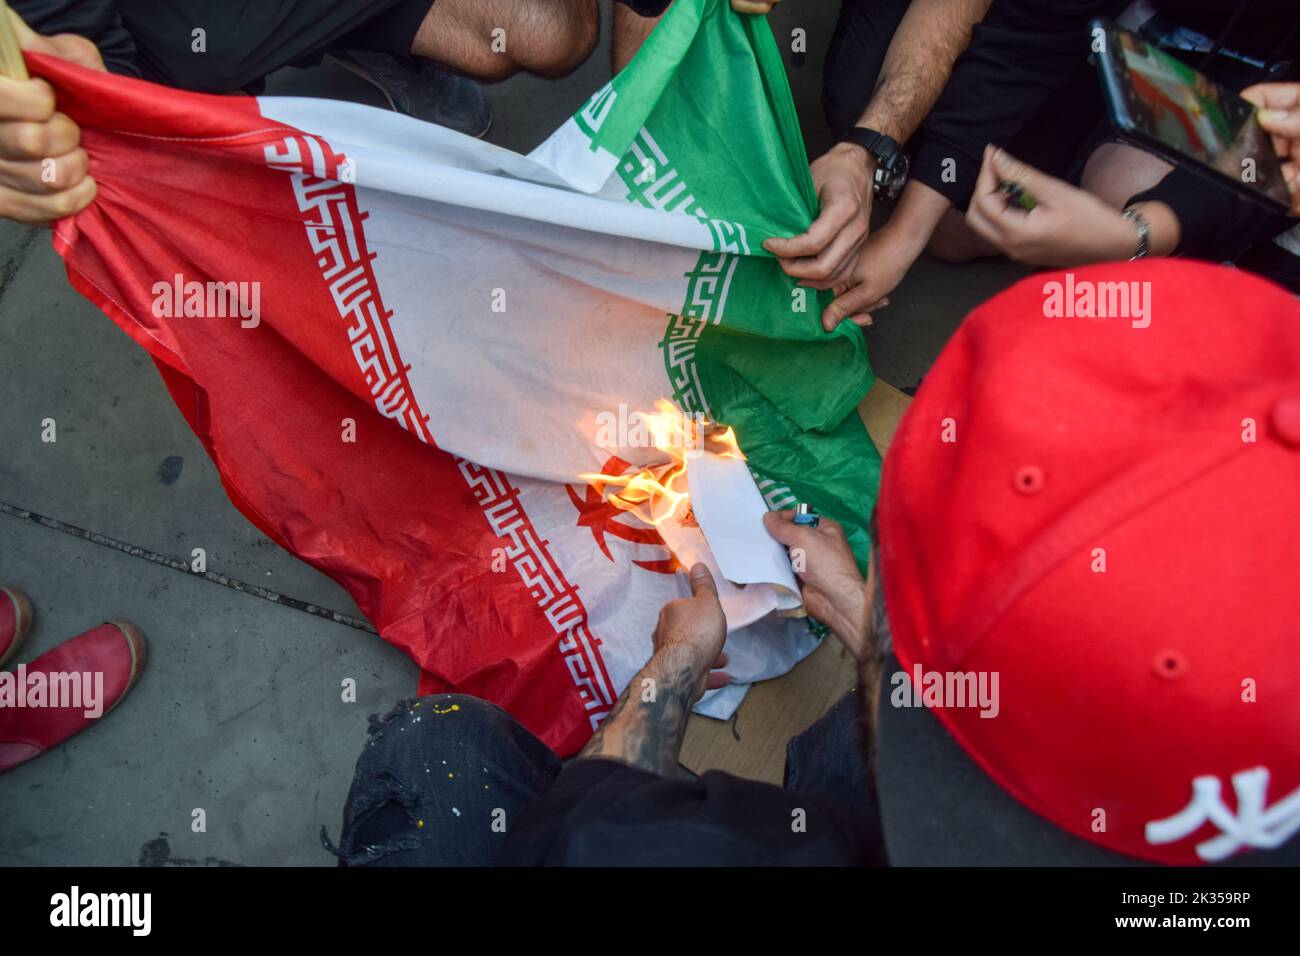 London, UK. 24th Sep, 2022. Protesters burn an Islamic Republic of Iran flag. Thousands of Iranians and other protesters gathered in Trafalgar Square in response to the death of Mahsa Amini, who died in police custody in Iran after being detained for allegedly not wearing a head scarf (hijab) "properly" in public. Credit: Vuk Valcic/Alamy Live News Stock Photo